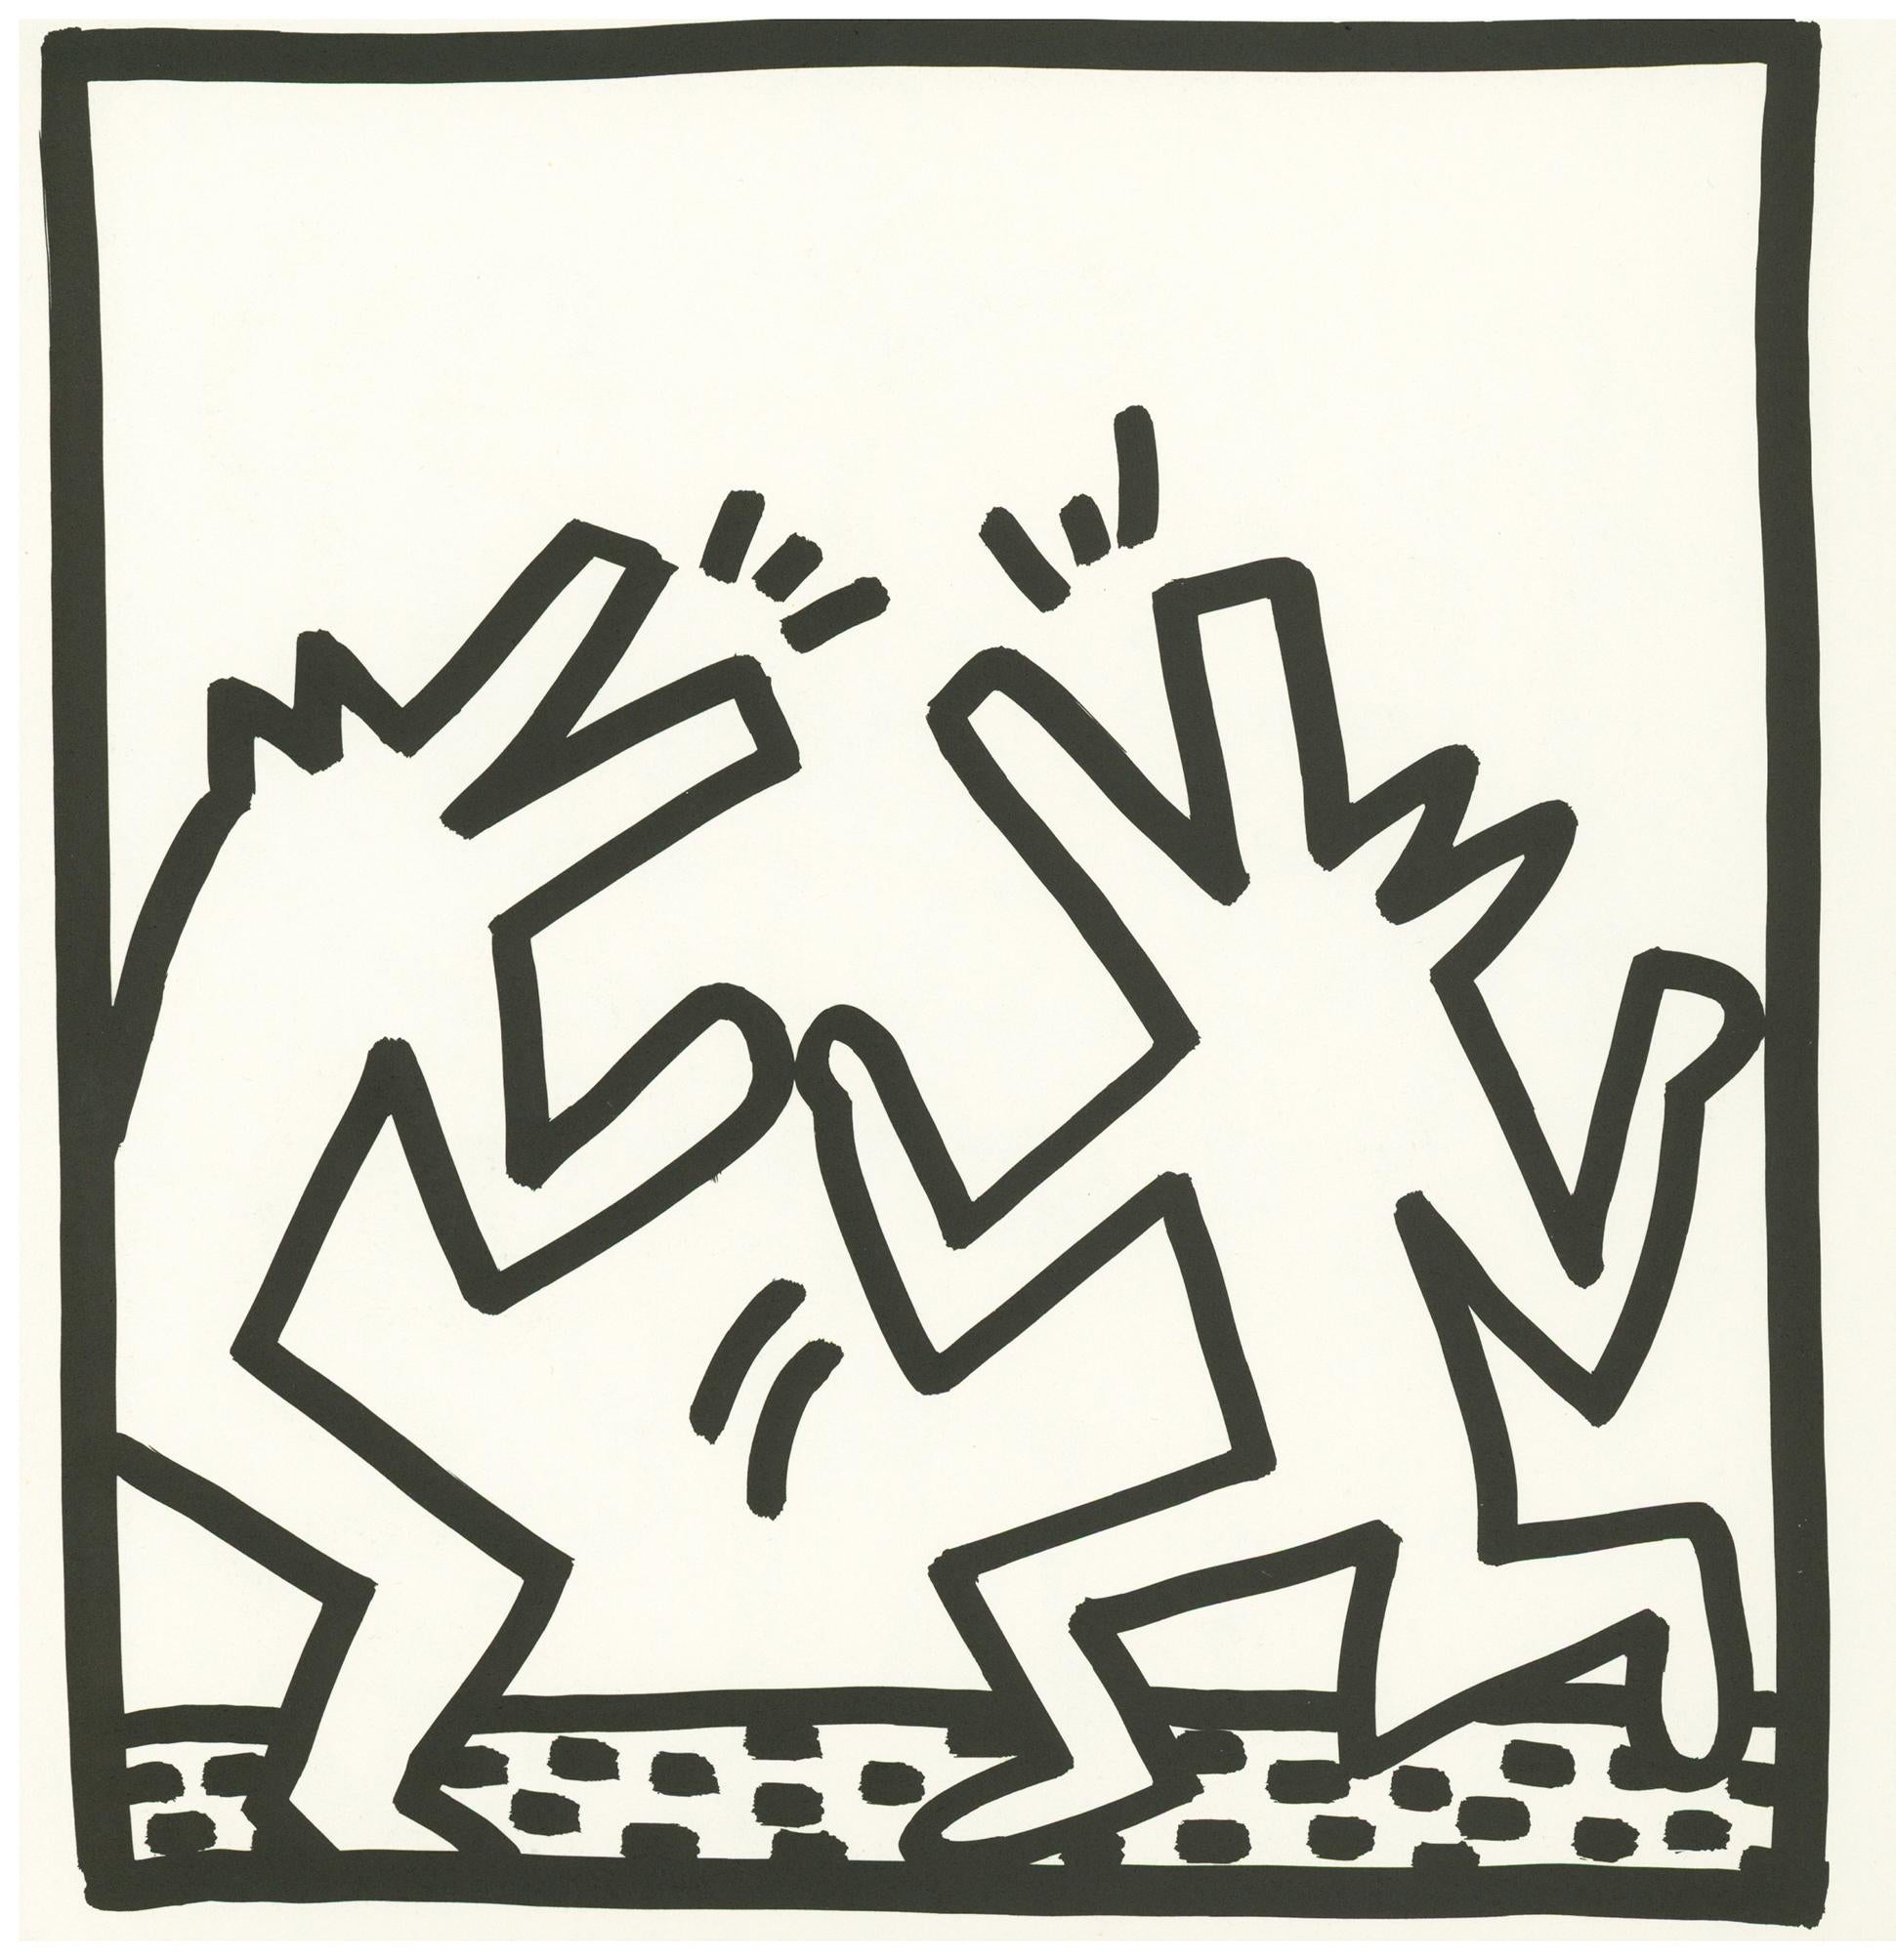 Keith Haring (untitled) Crocodiles lithograph 1982 (vintage Keith Haring) 